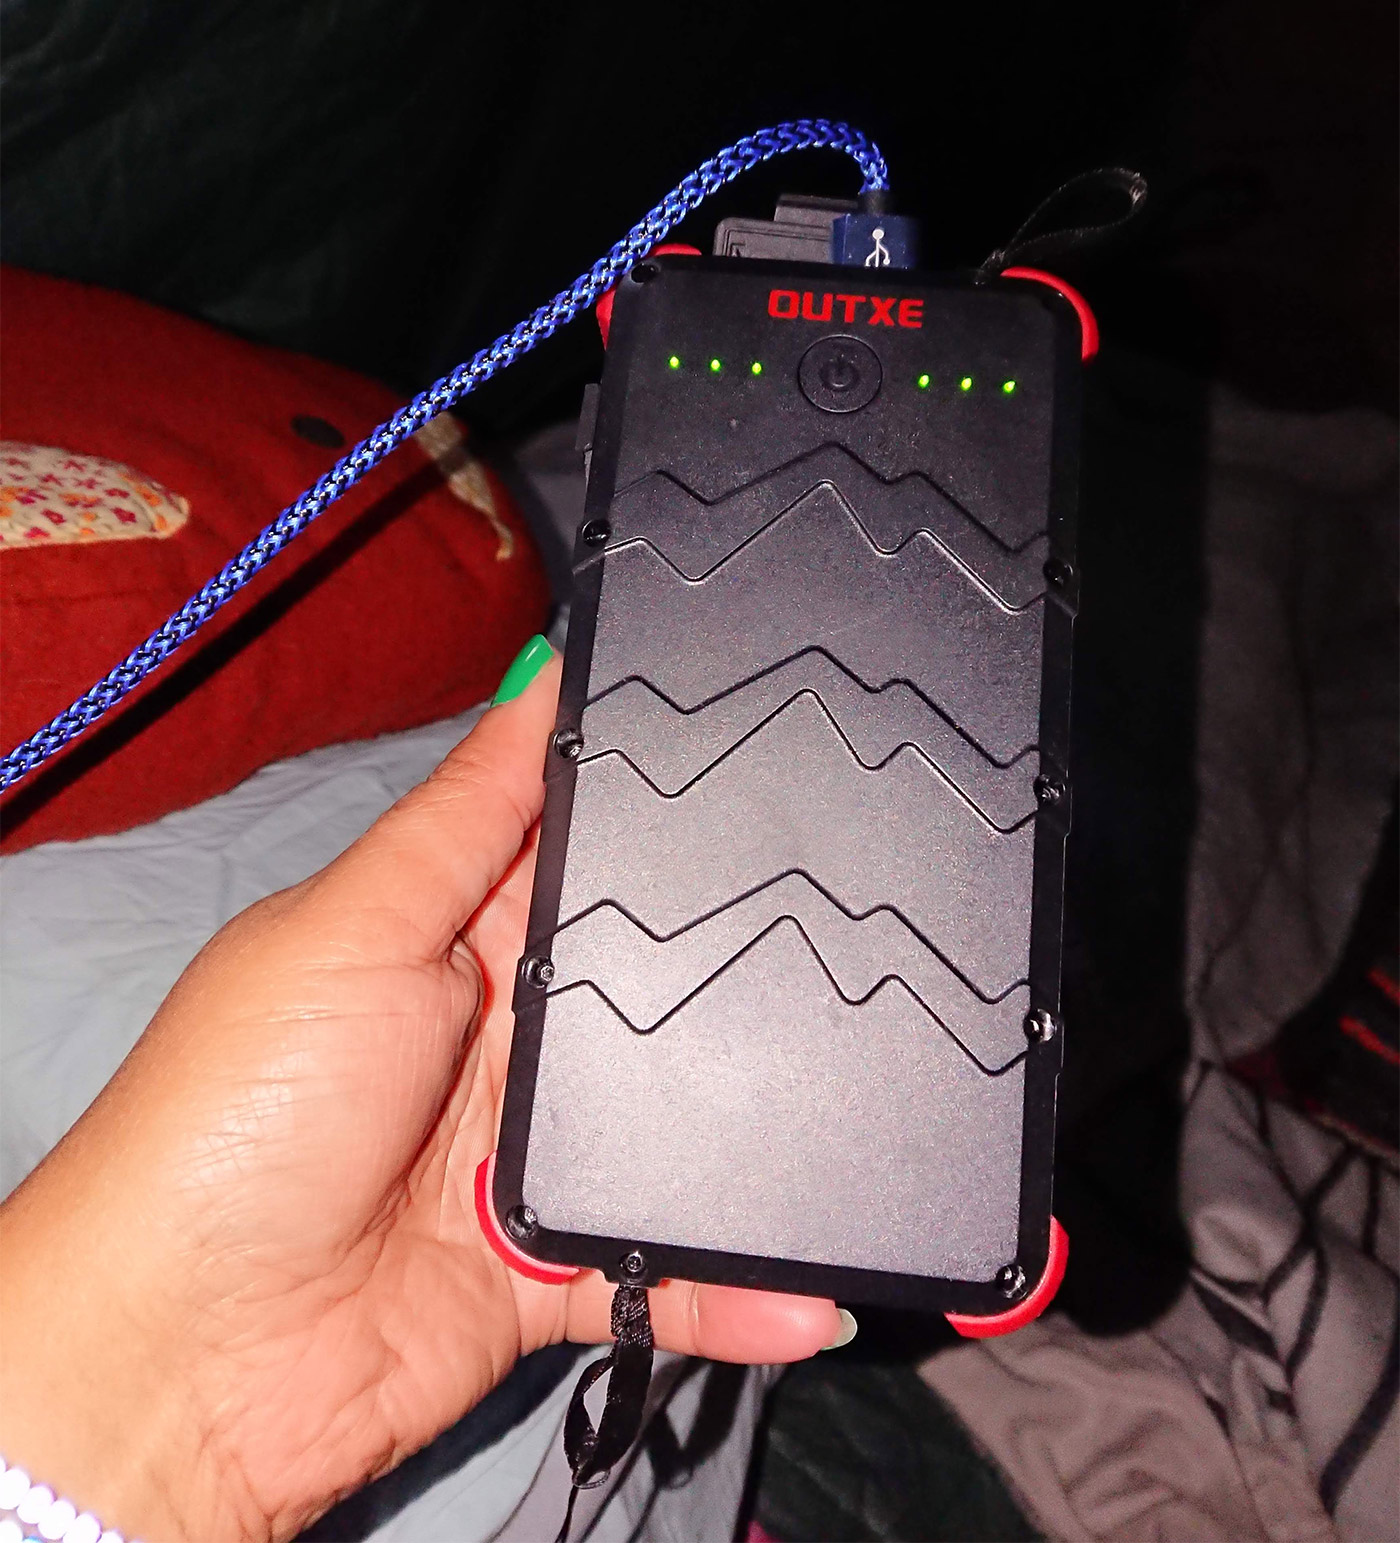 OUTEX Rugged Powerbank review